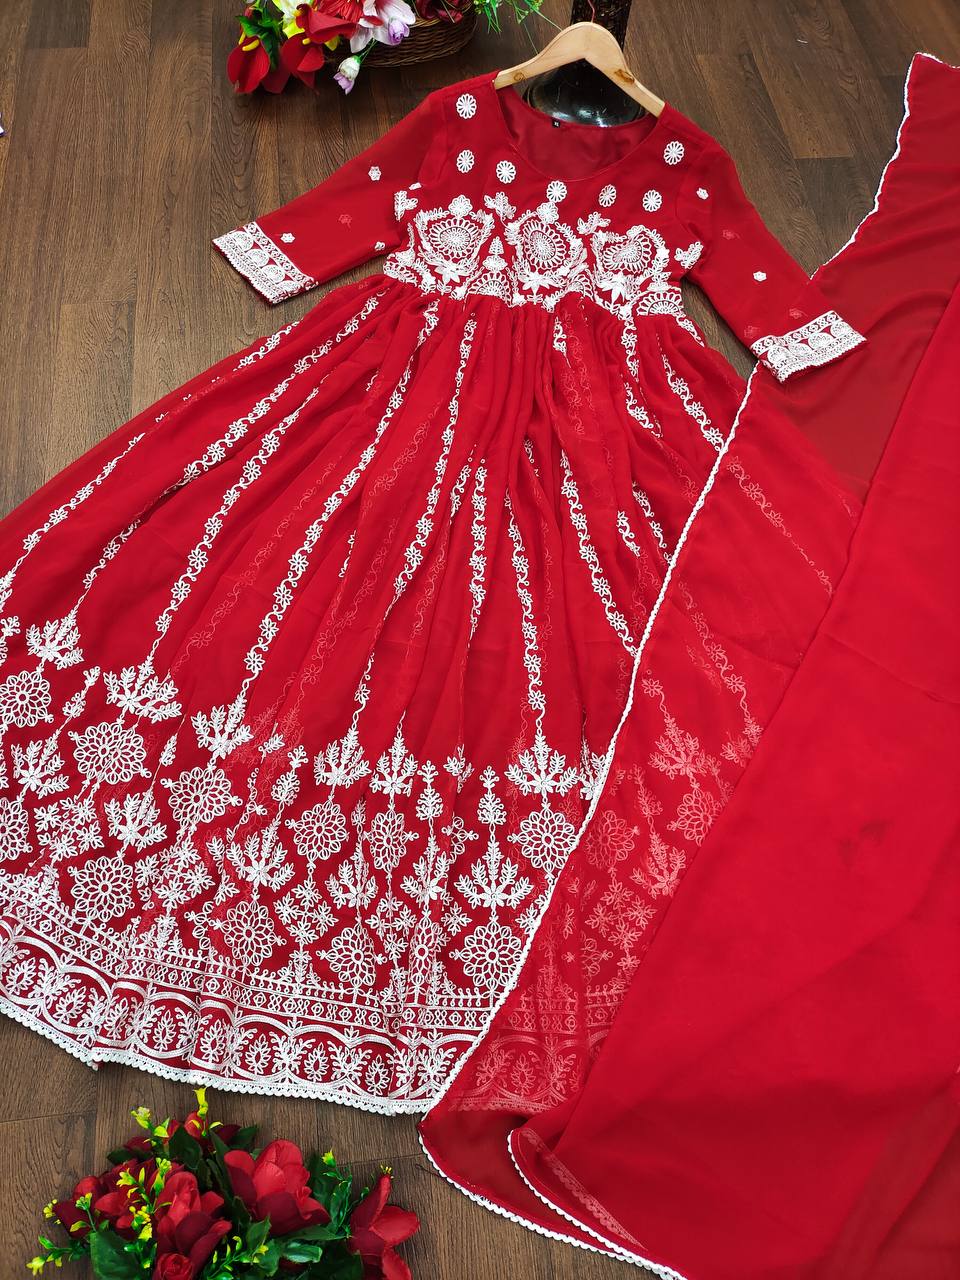 Marvelous Red Color Embroidery Work Gown